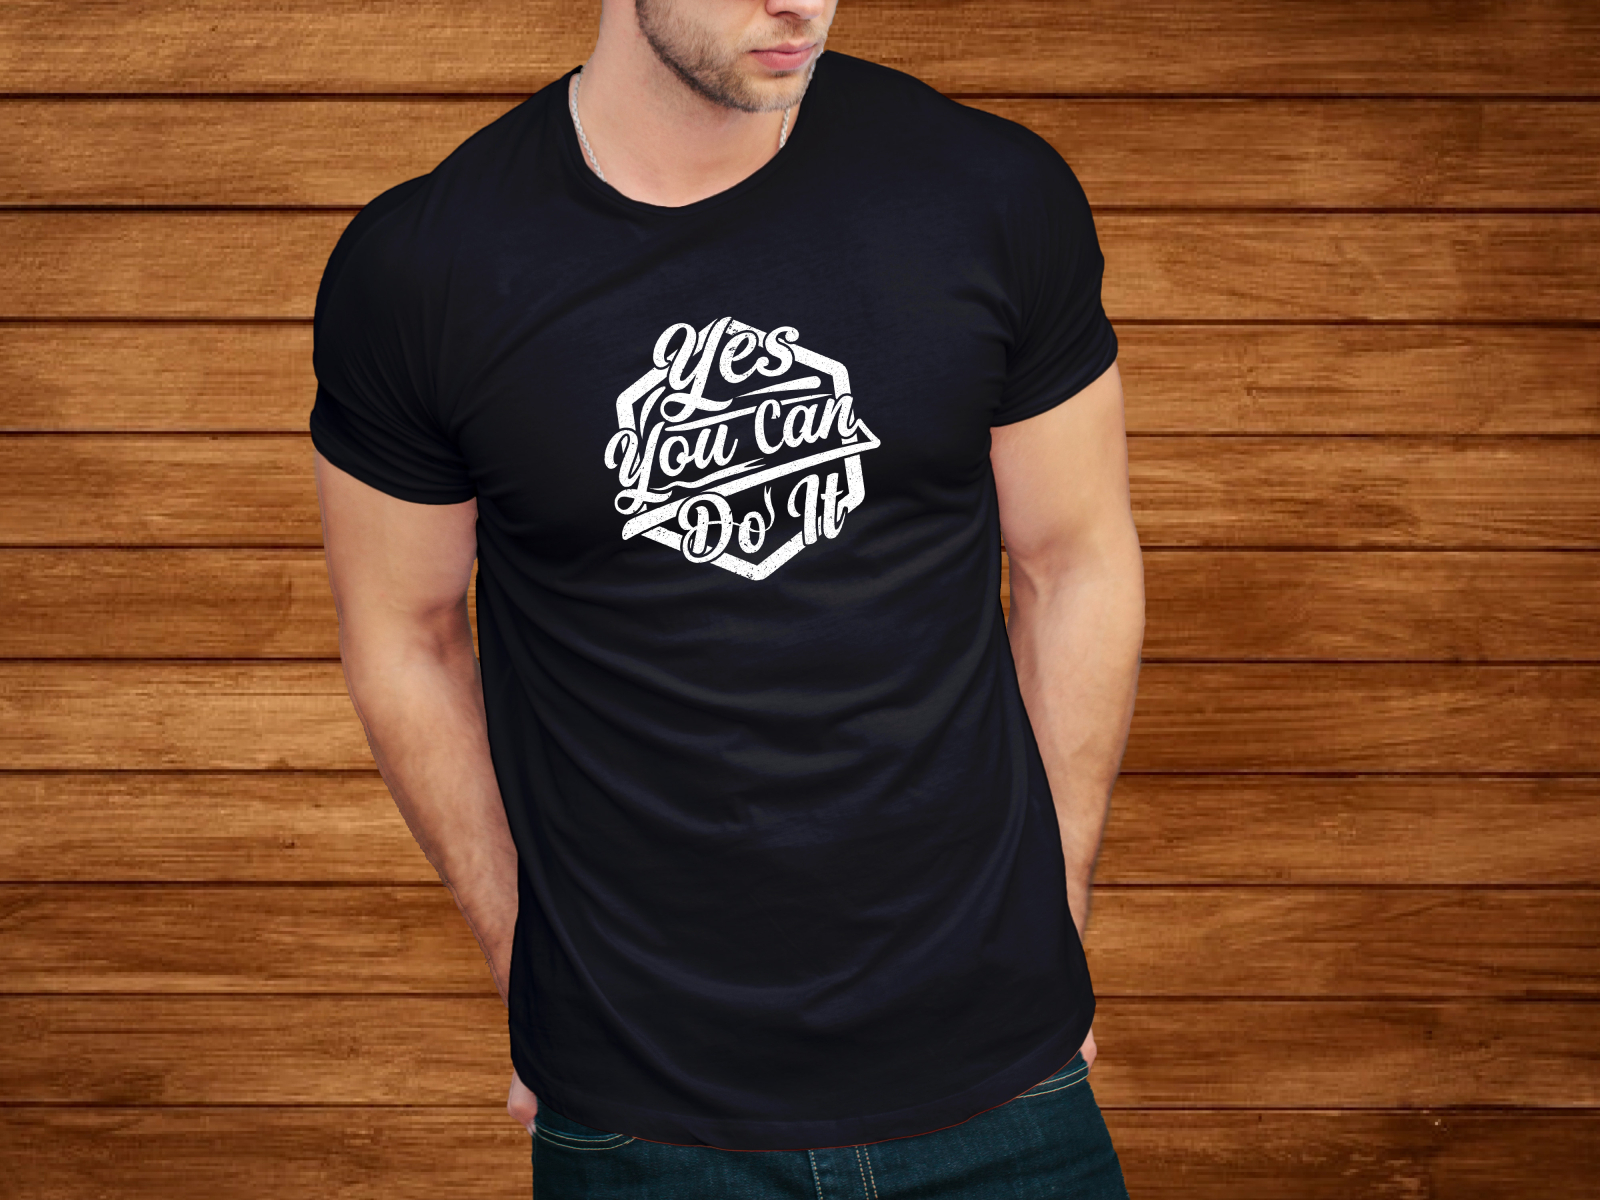 Yes you can do it typography t shirt design by MD. WASIM AKRAM on Dribbble